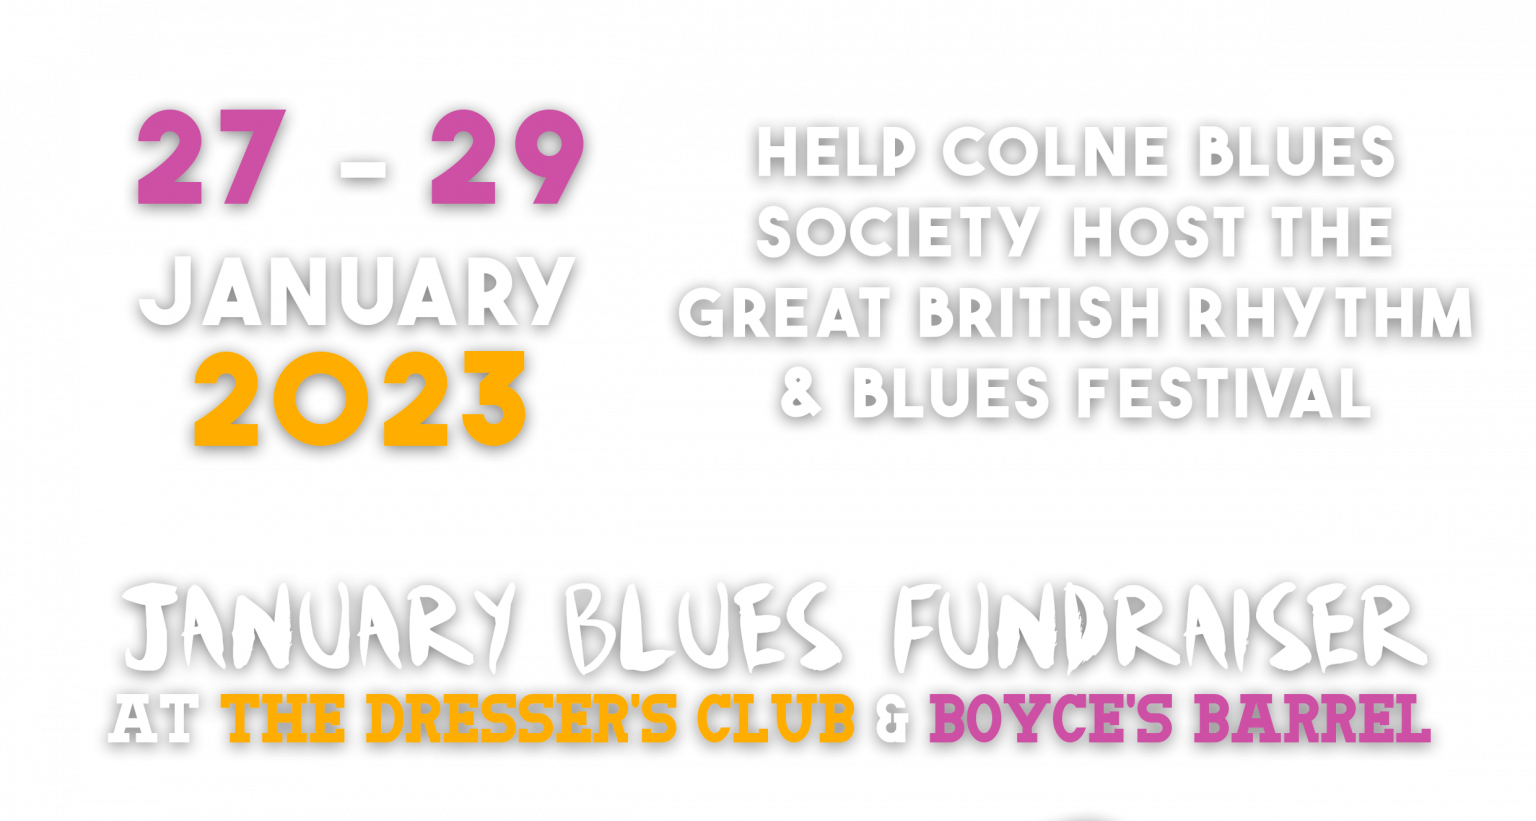 Colne Blues Society Artistic Director of the Great British Rhythm